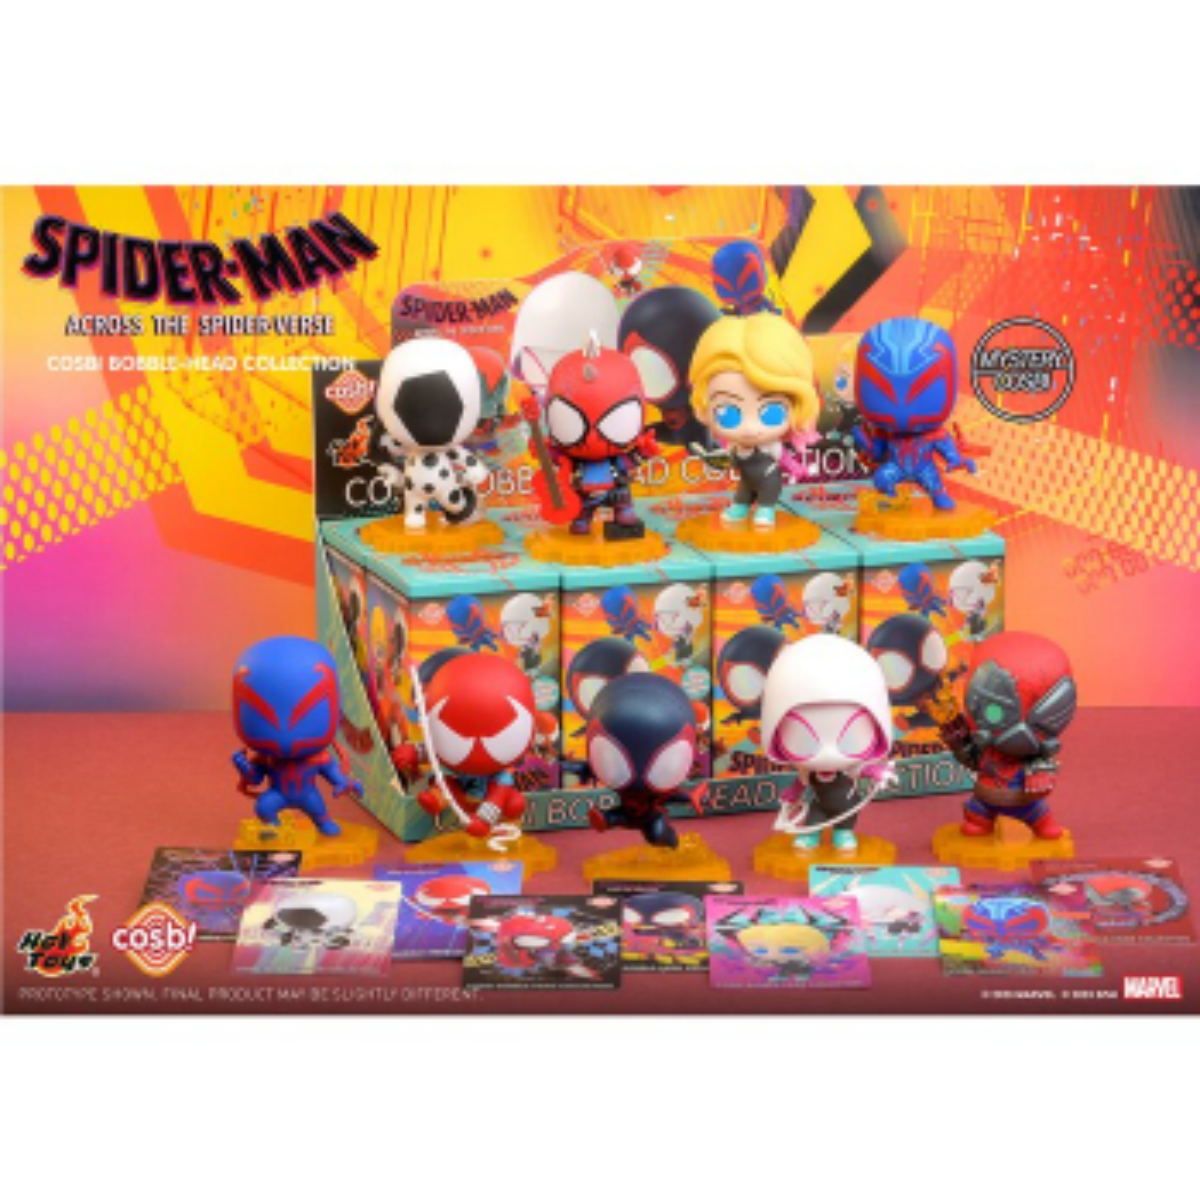 Spider-Man: Across The Spider-Verse Cosbi Bobble-Head Collection-Single Box (Random)-Marvel Comics-Ace Cards & Collectibles